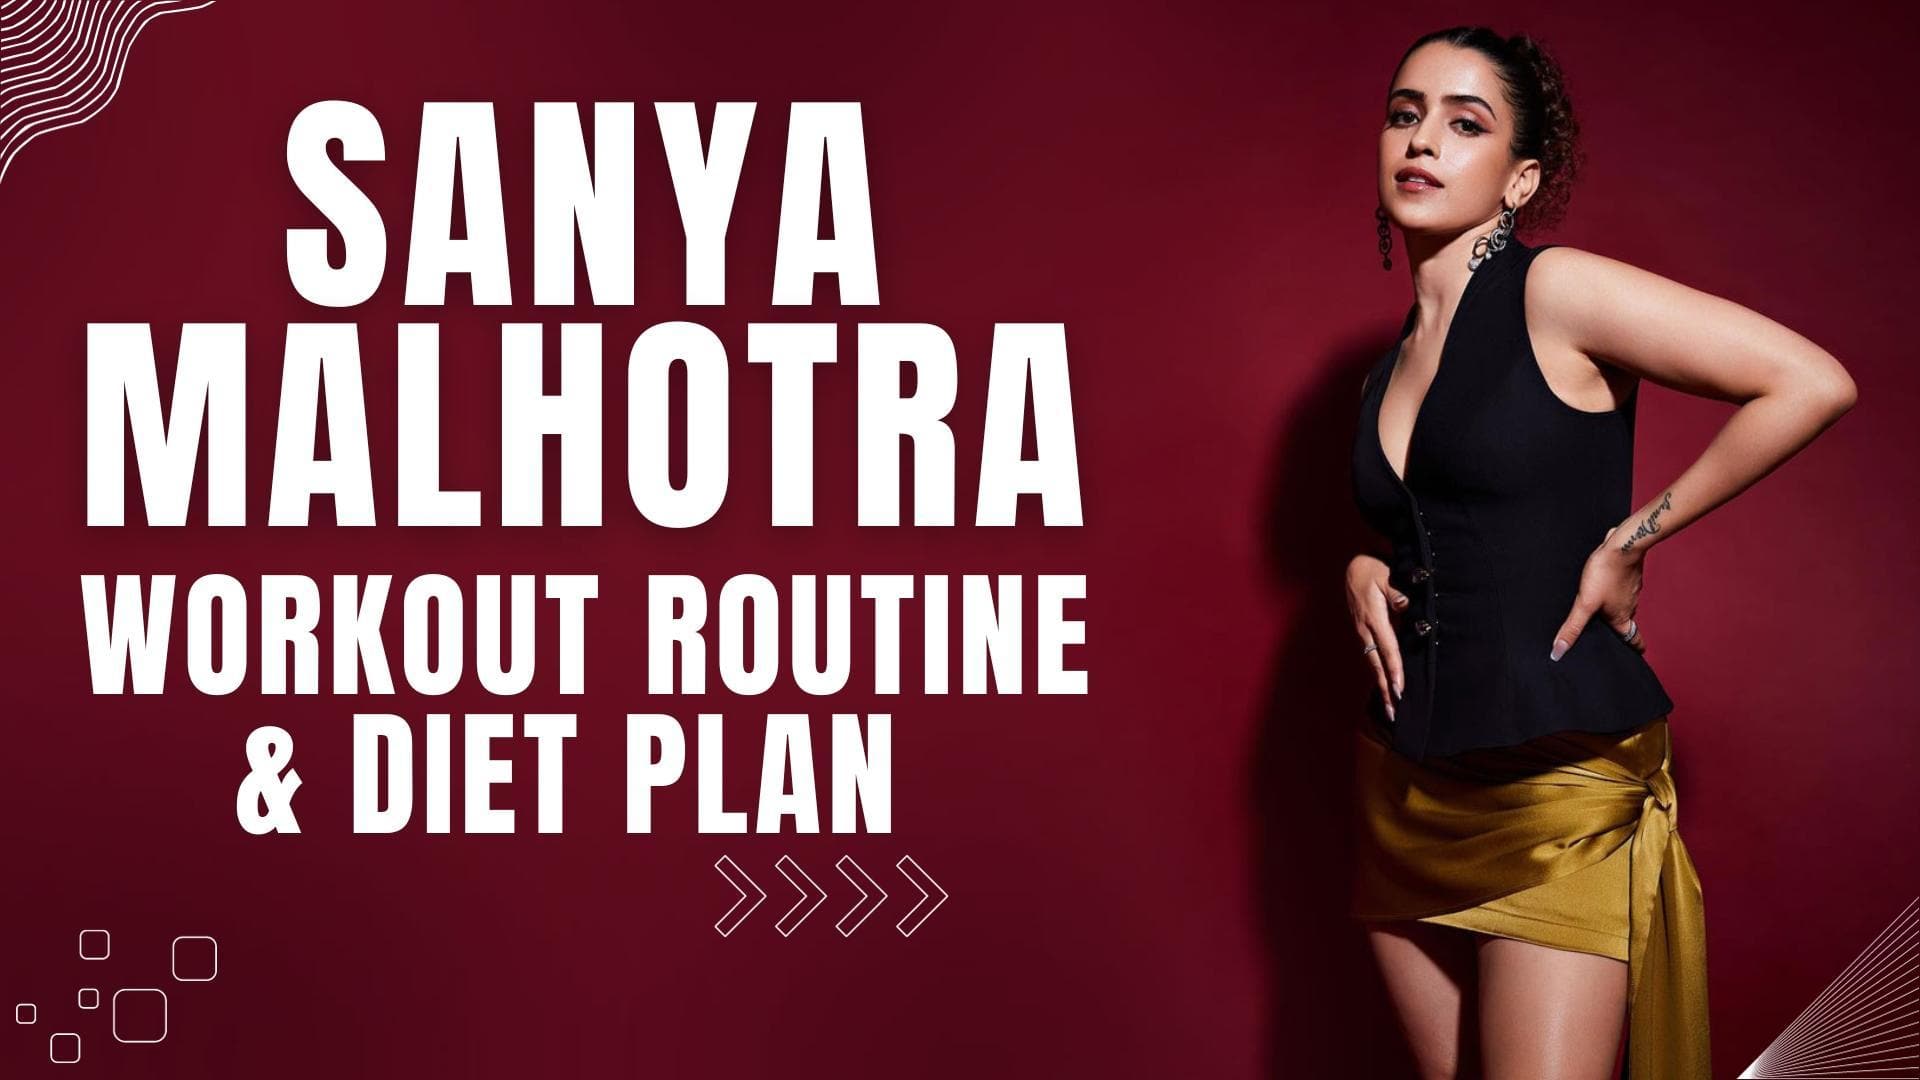 Sanya Malhotra Fitness: Follow the actress' diet plan for a week and see results | TheHealthSite.com